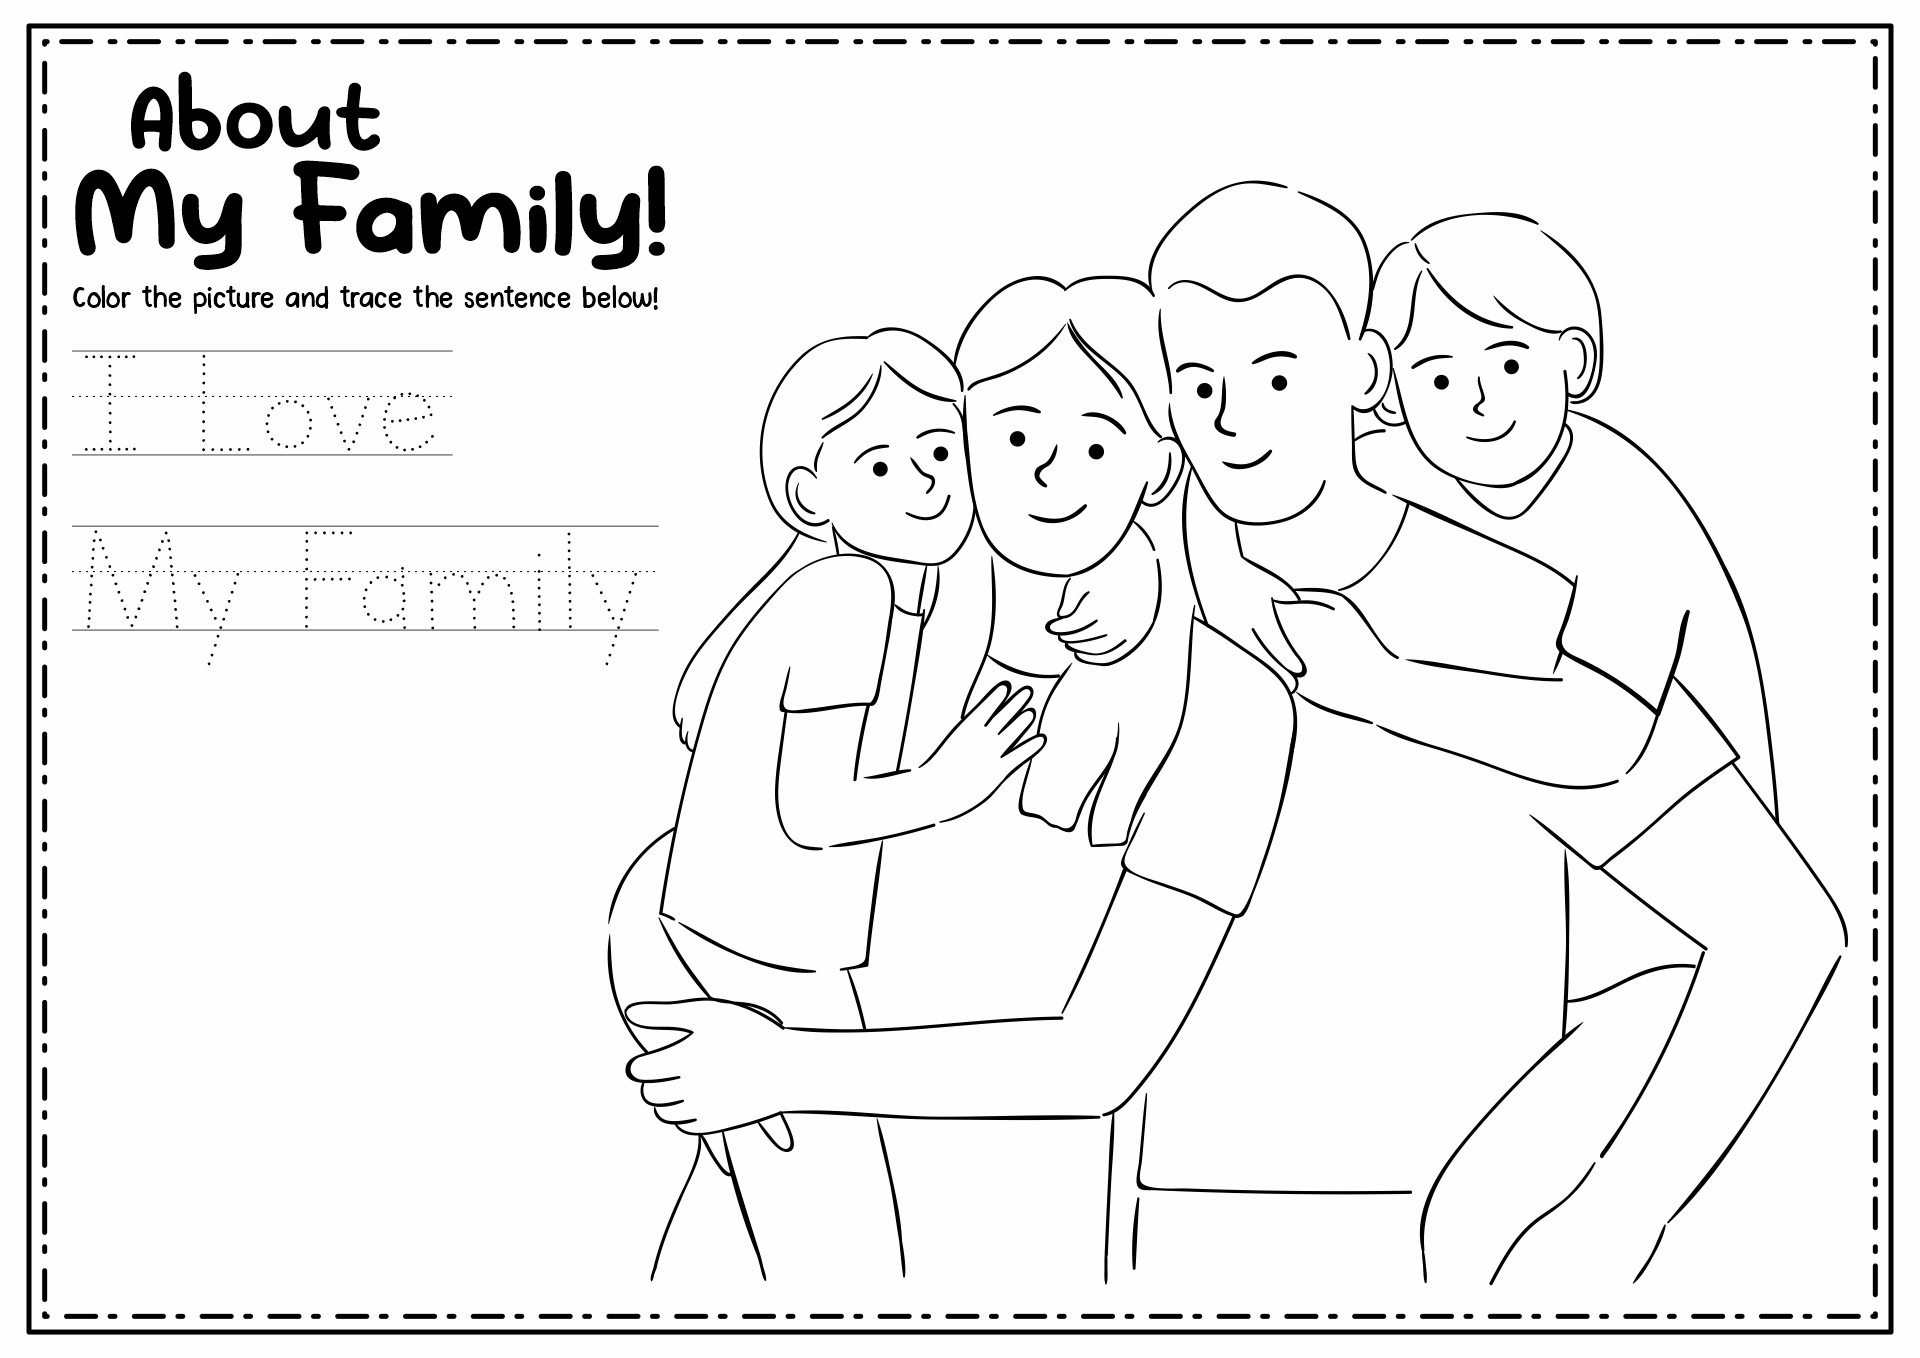 All About Me and My Family Coloring Pages Image